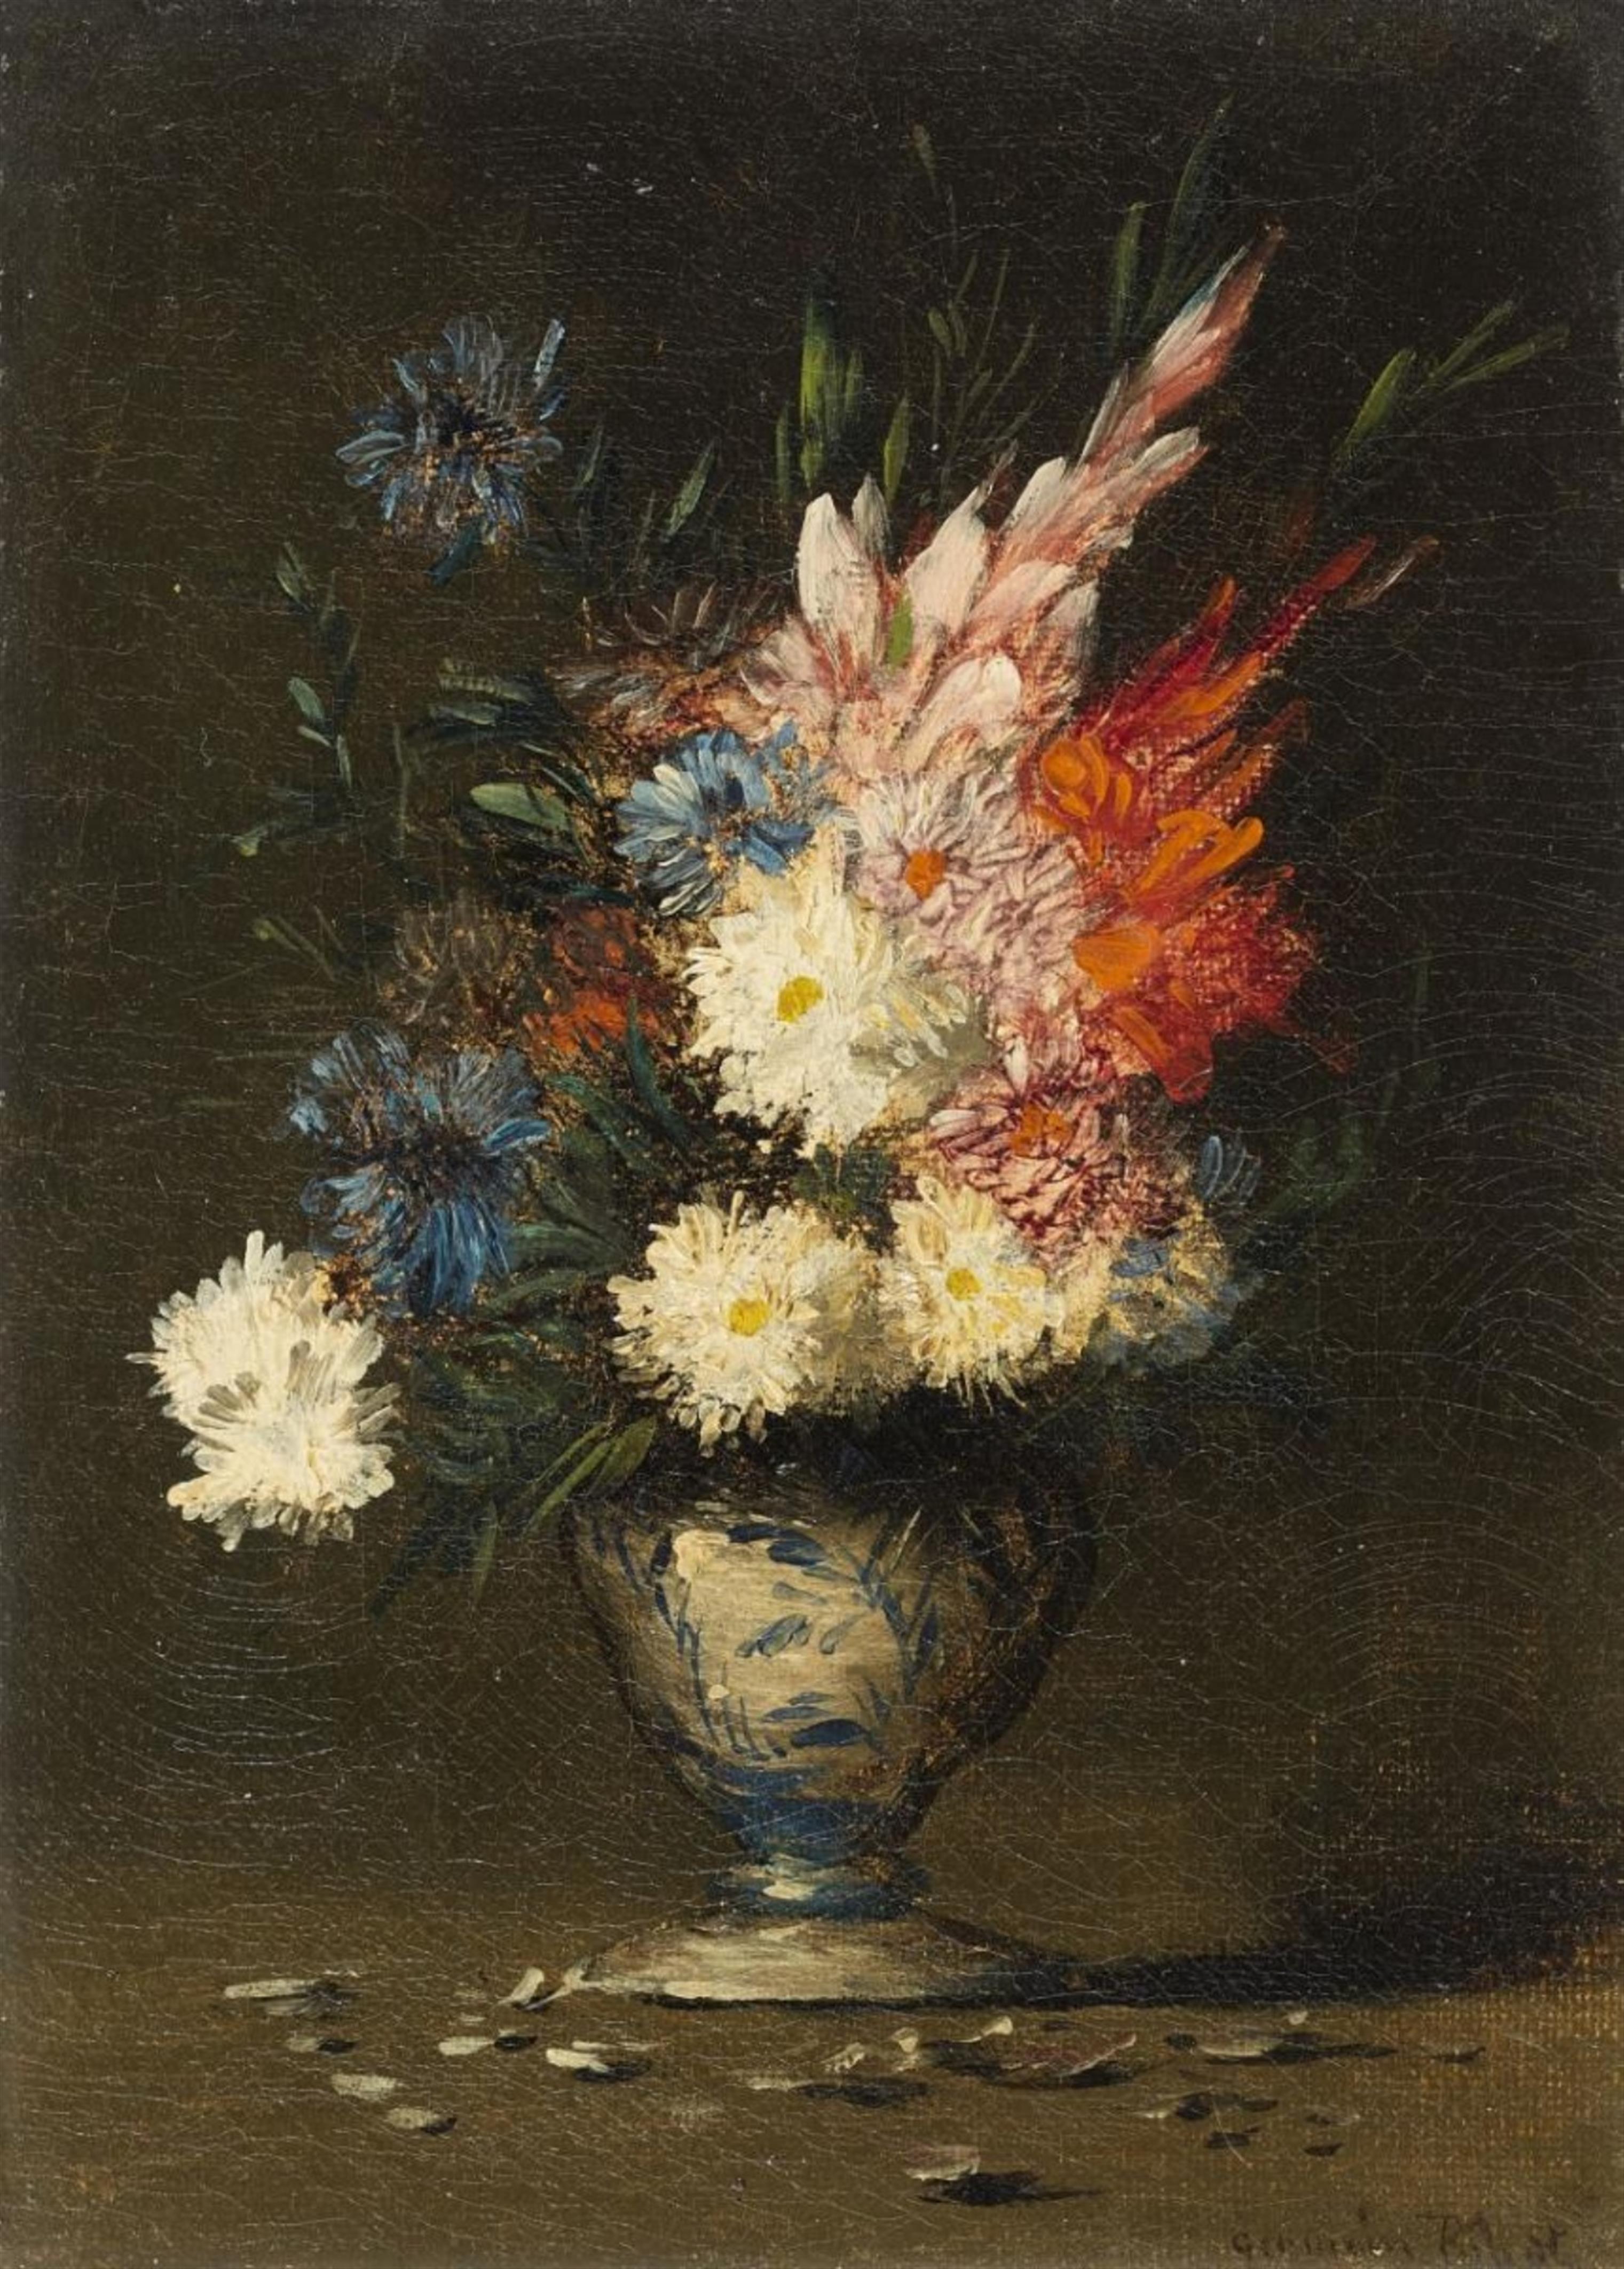 Germain Théodore Ribot - Bouquet in a Porcelain Vase - image-1